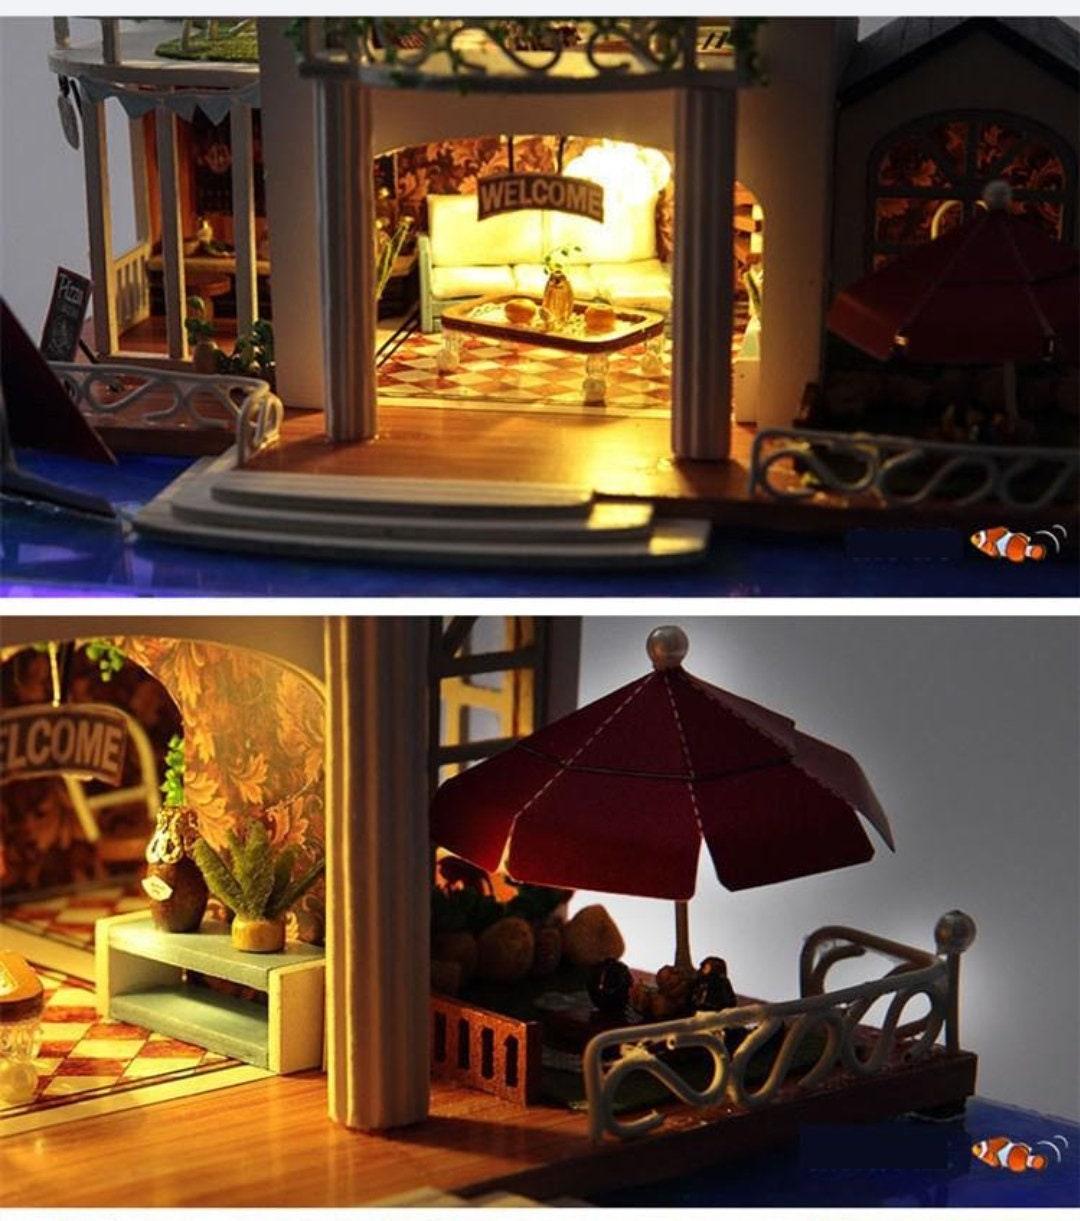 DIY Dollhouse Kit Under Water Life Miniature Dollhouse with Under Water Bedroom, Marine Theme Dollhouse With Free Dust Cover - Rajbharti Crafts